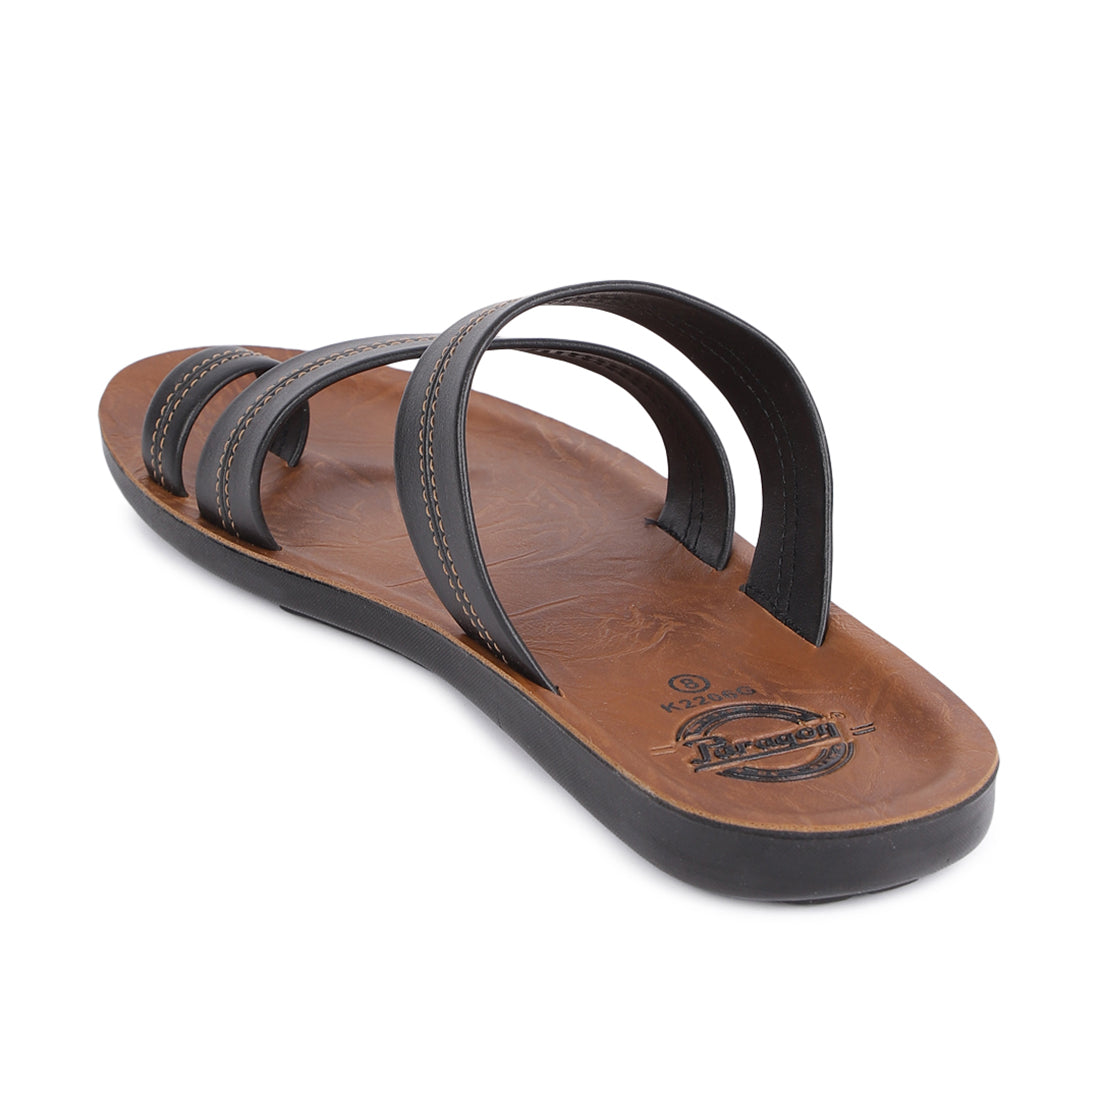 Paragon  PUK2206G Men Stylish Sandals | Comfortable Sandals for Daily Outdoor Use | Casual Formal Sandals with Cushioned Soles